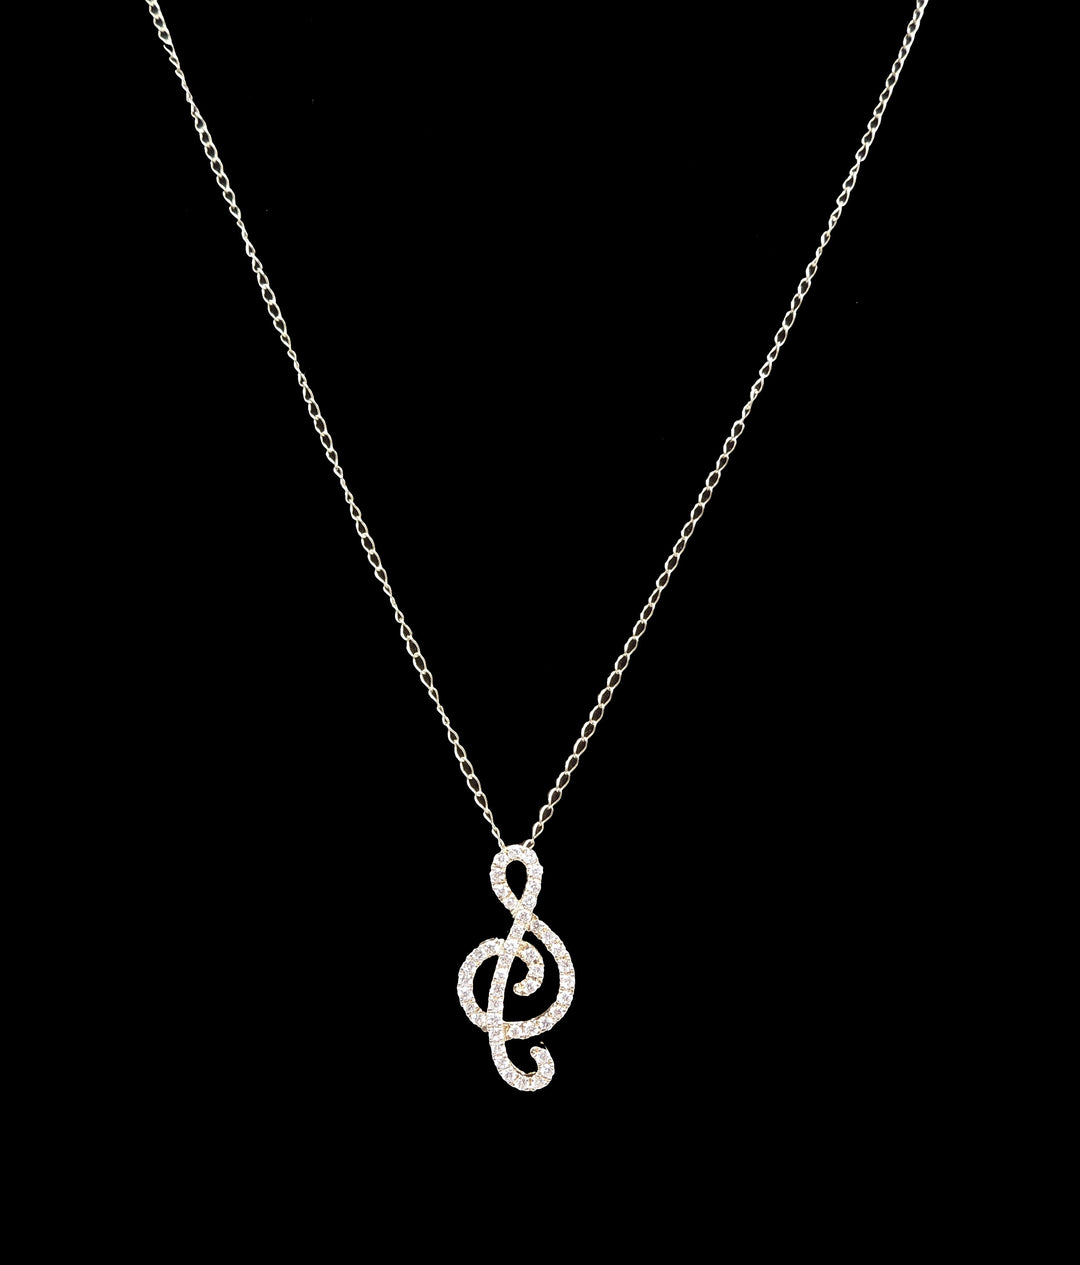 18K Yellow Gold and Diamond Treble Clef Necklace